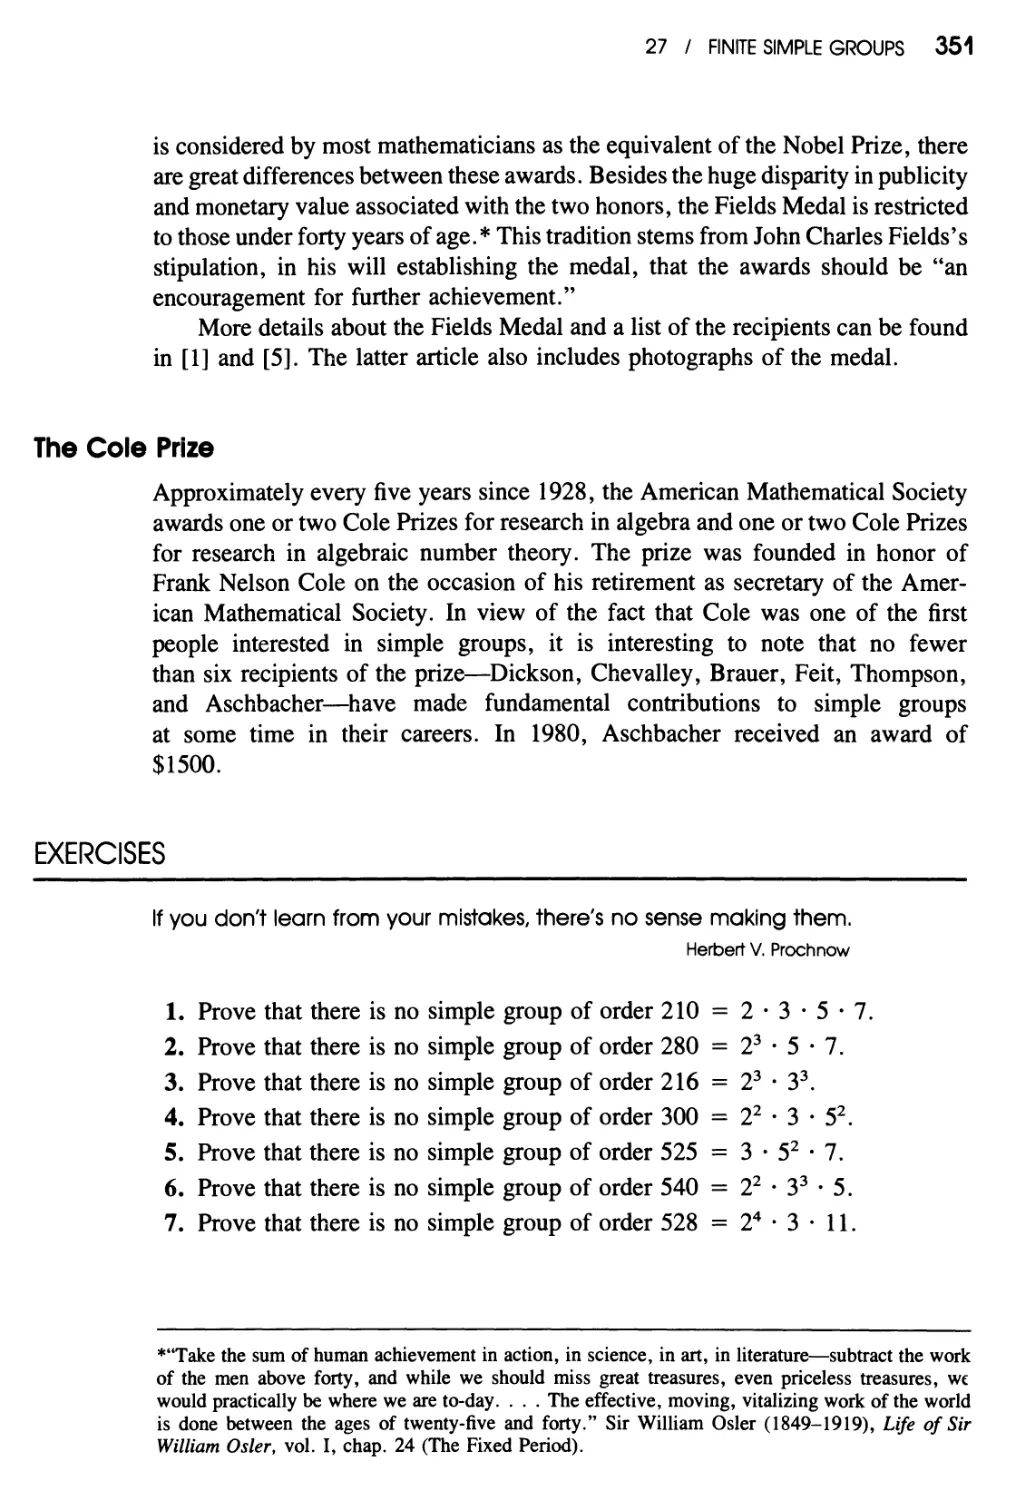 The Cole Prize
Exercises